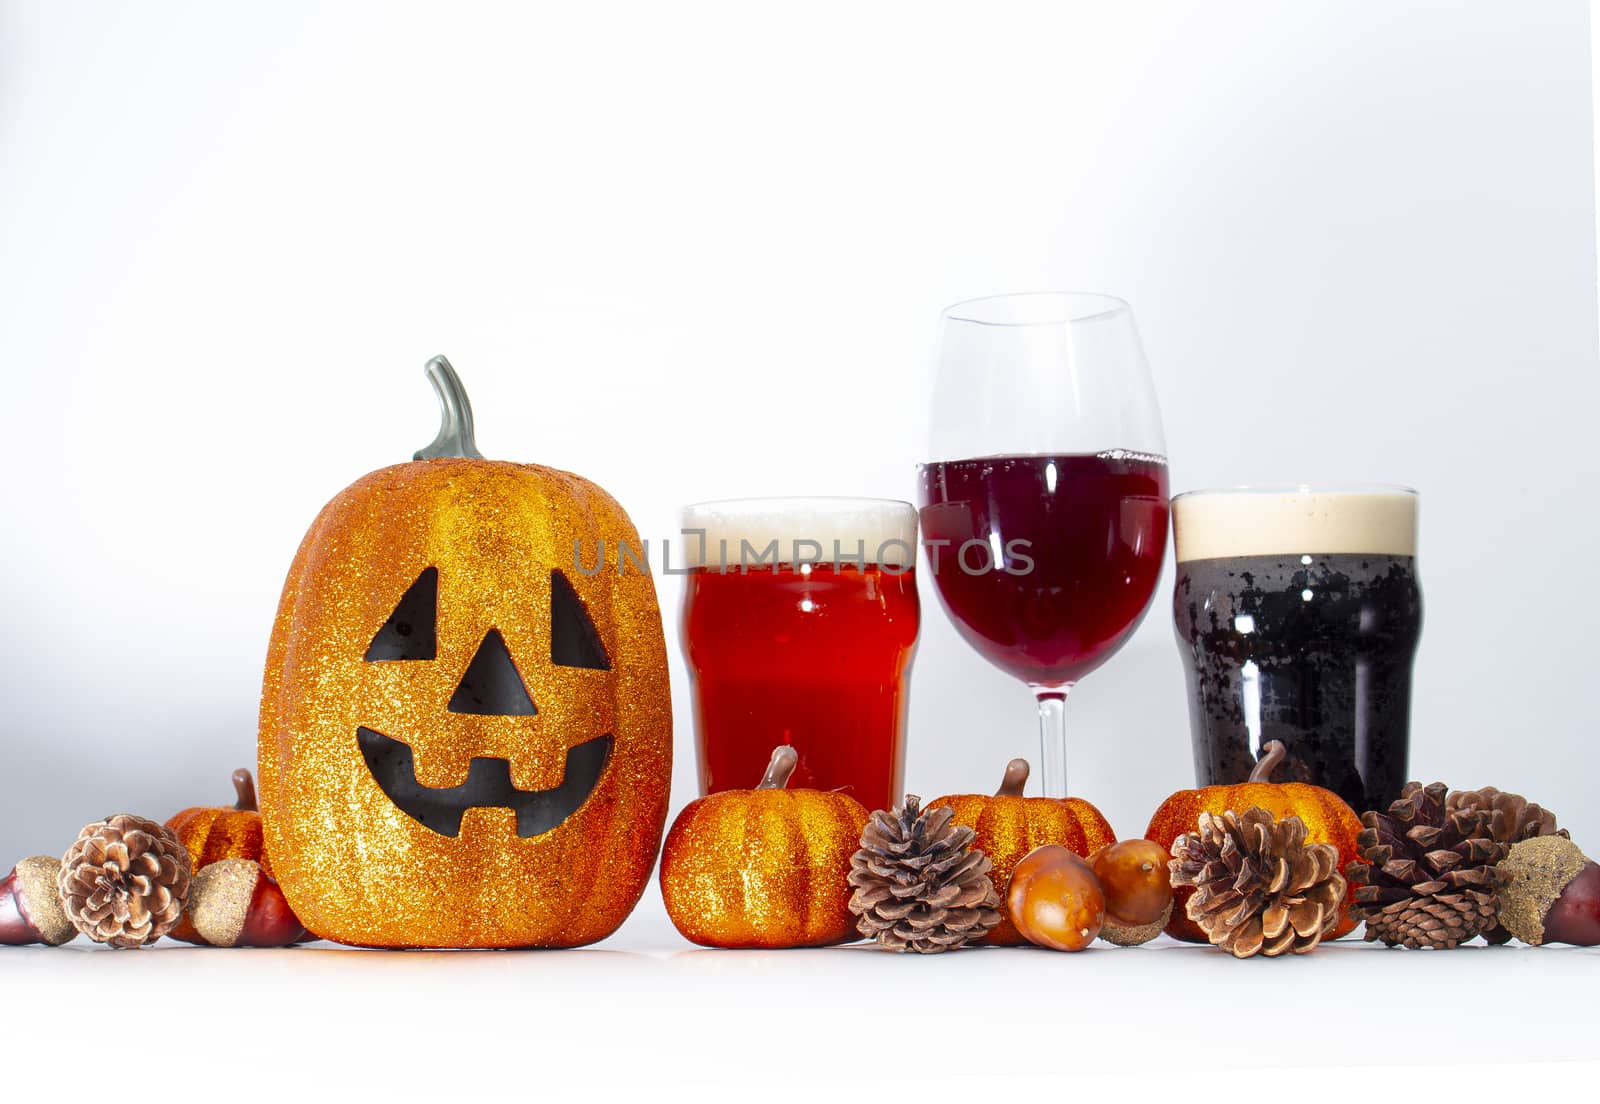 Pumpkin with alcoholic drinks with ornaments around on a white background